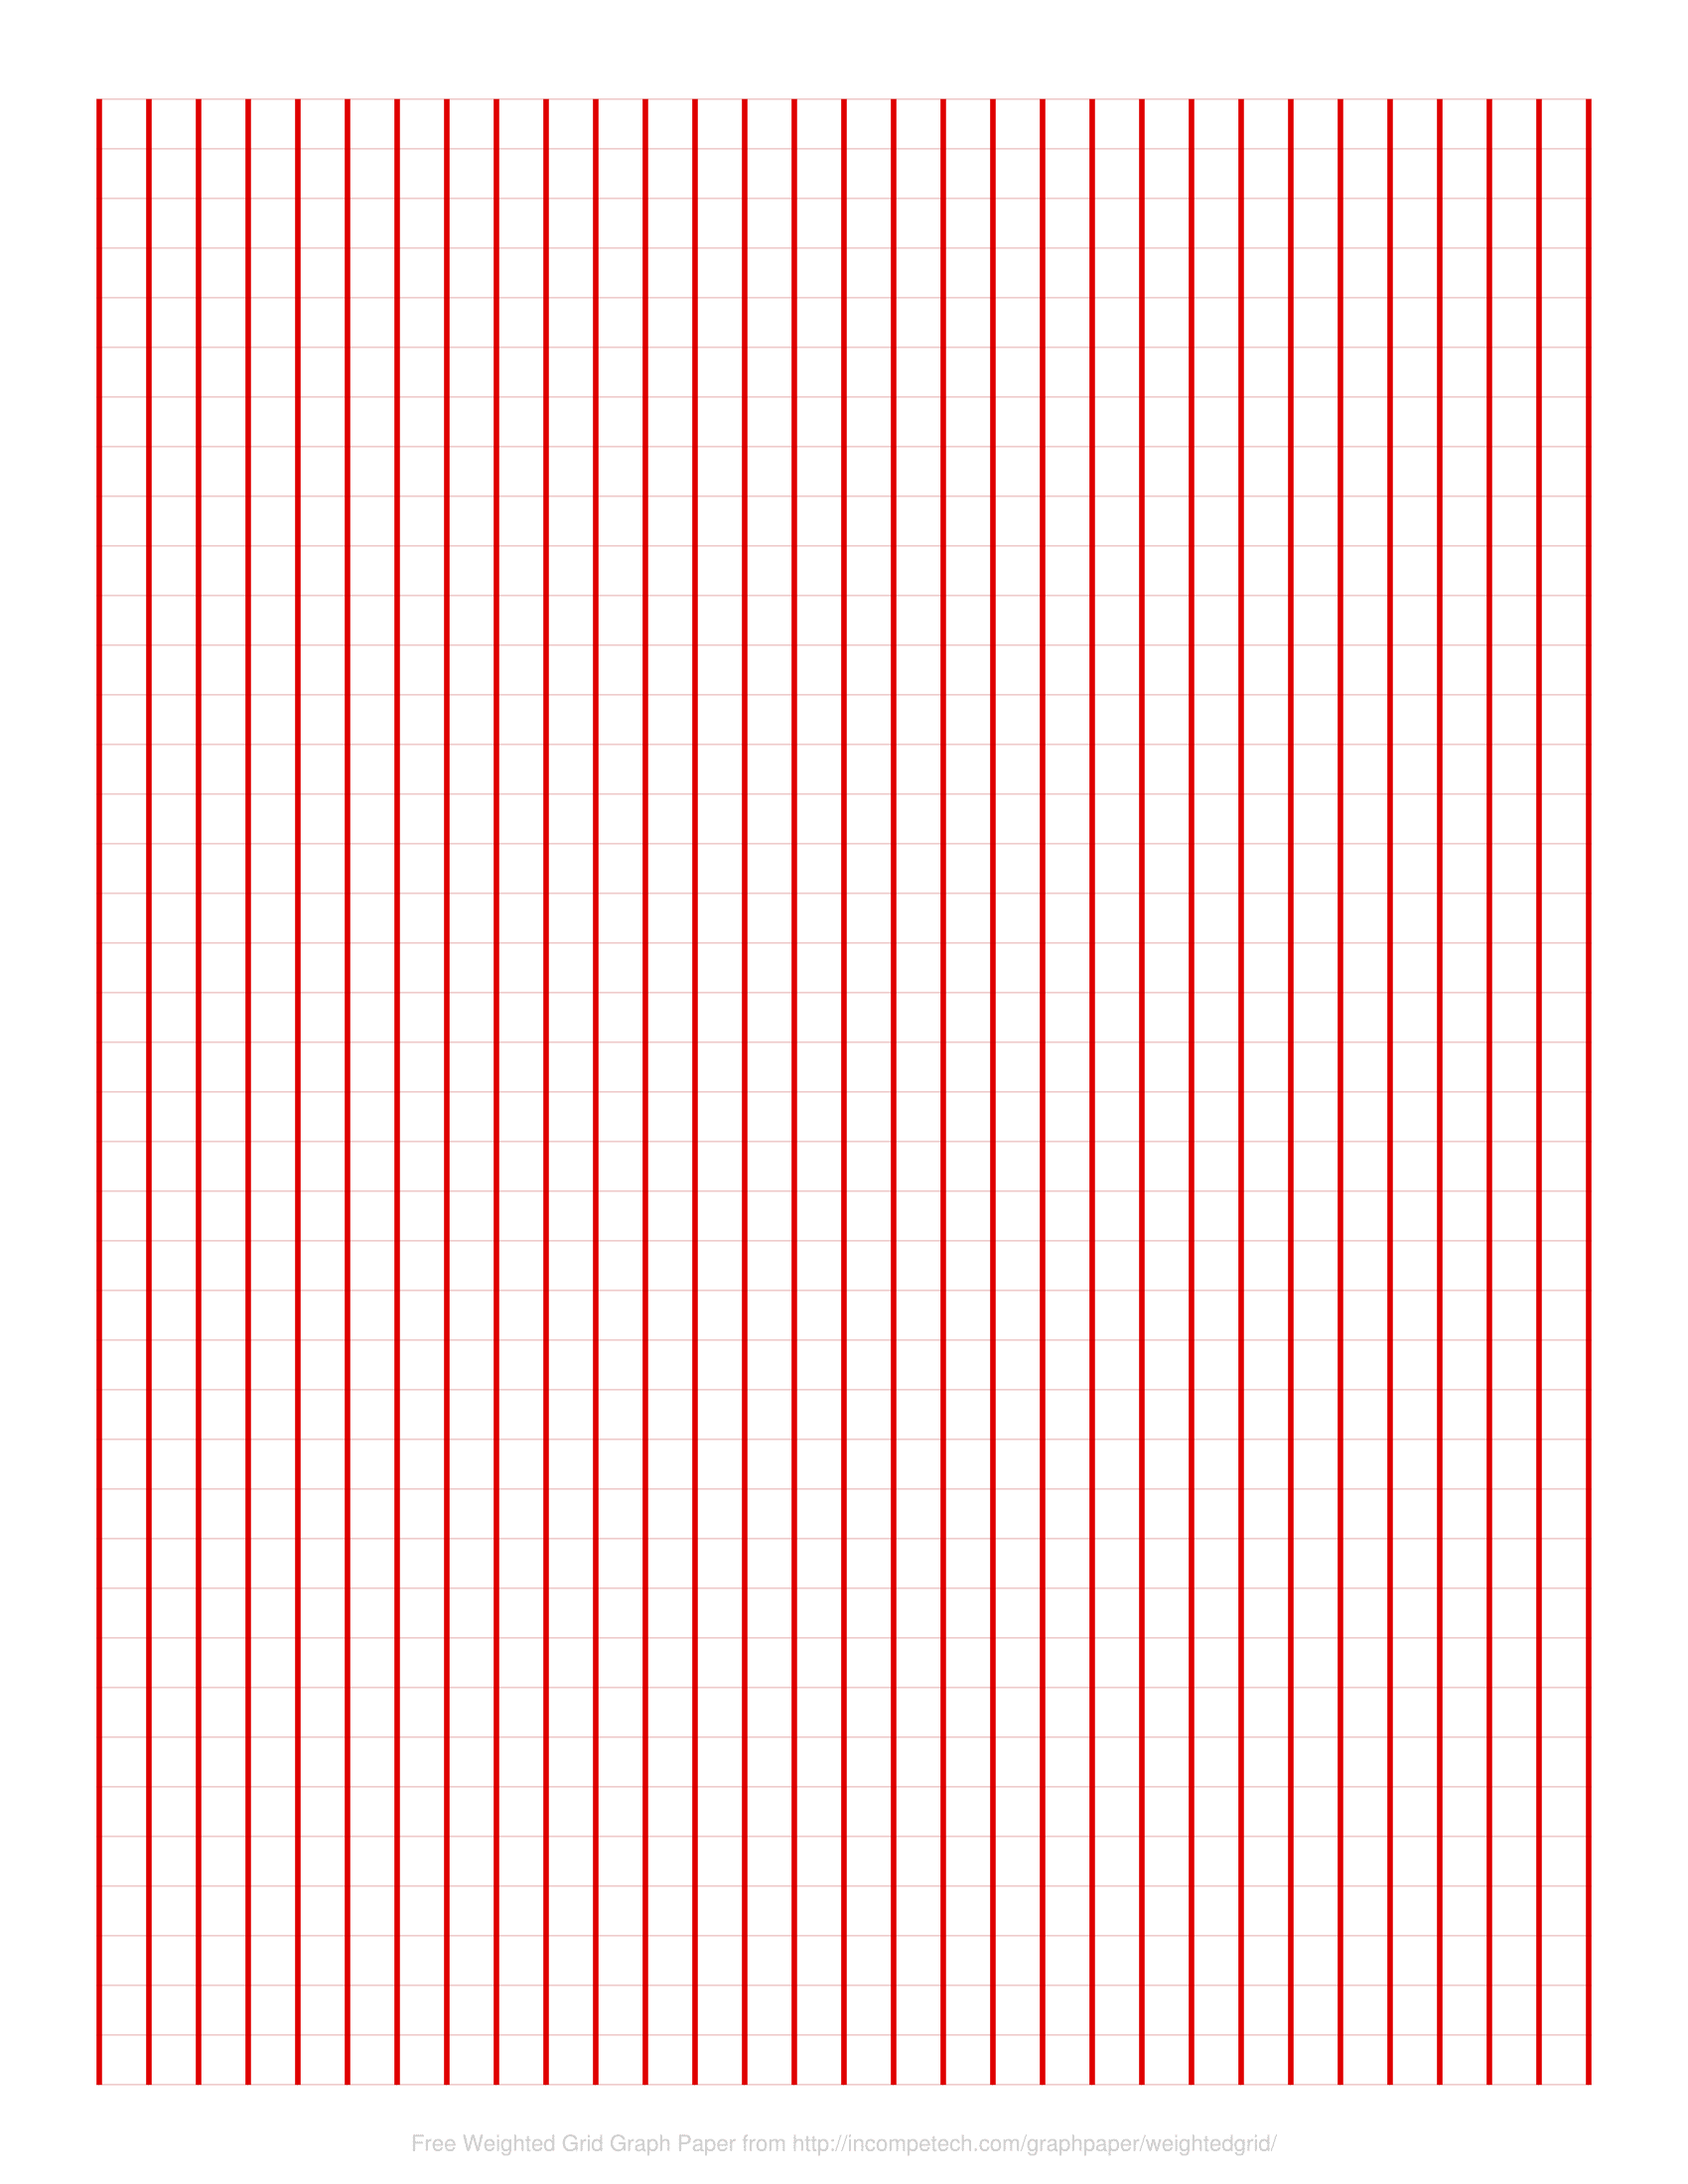 Free Online Graph Paper / Inverted